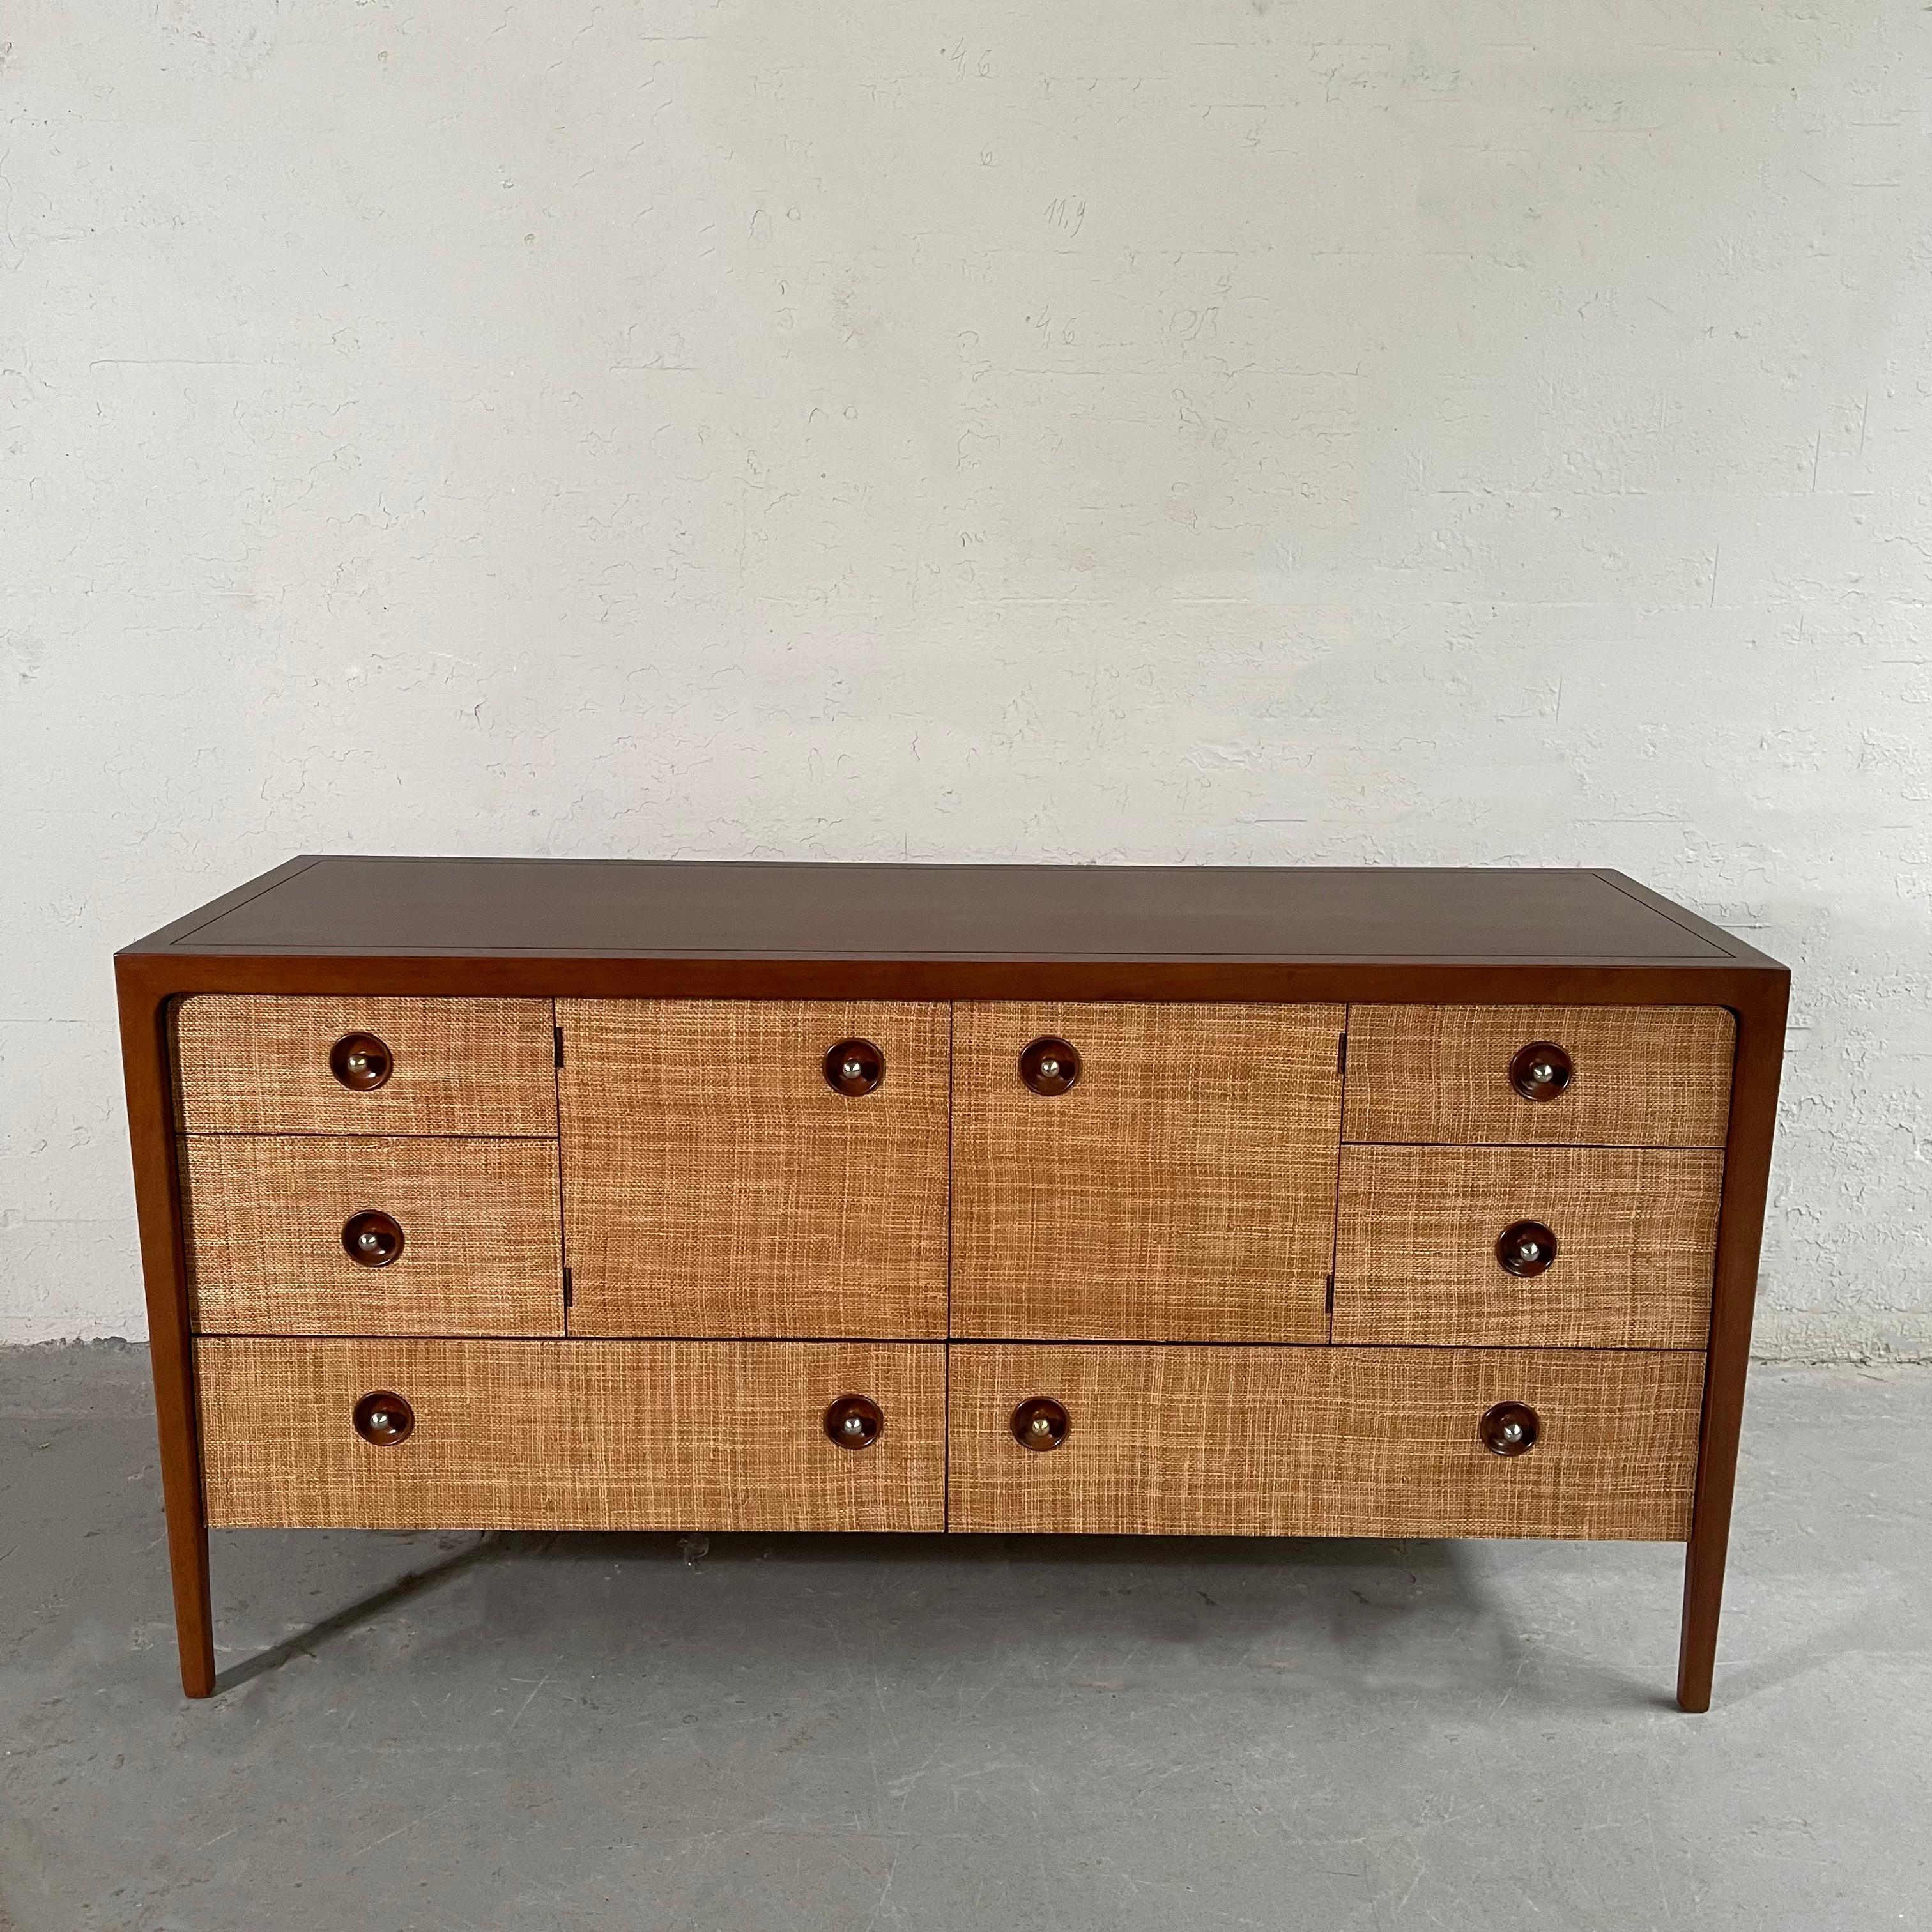 Mid-Century Modern, mahogany, credenza dresser by John Van Koert for Drexel Counterpoint features a custom grasscloth facade treatment that contrasts nicely with his signature round brass plated recessed pulls. This cabinet has six drawers and a